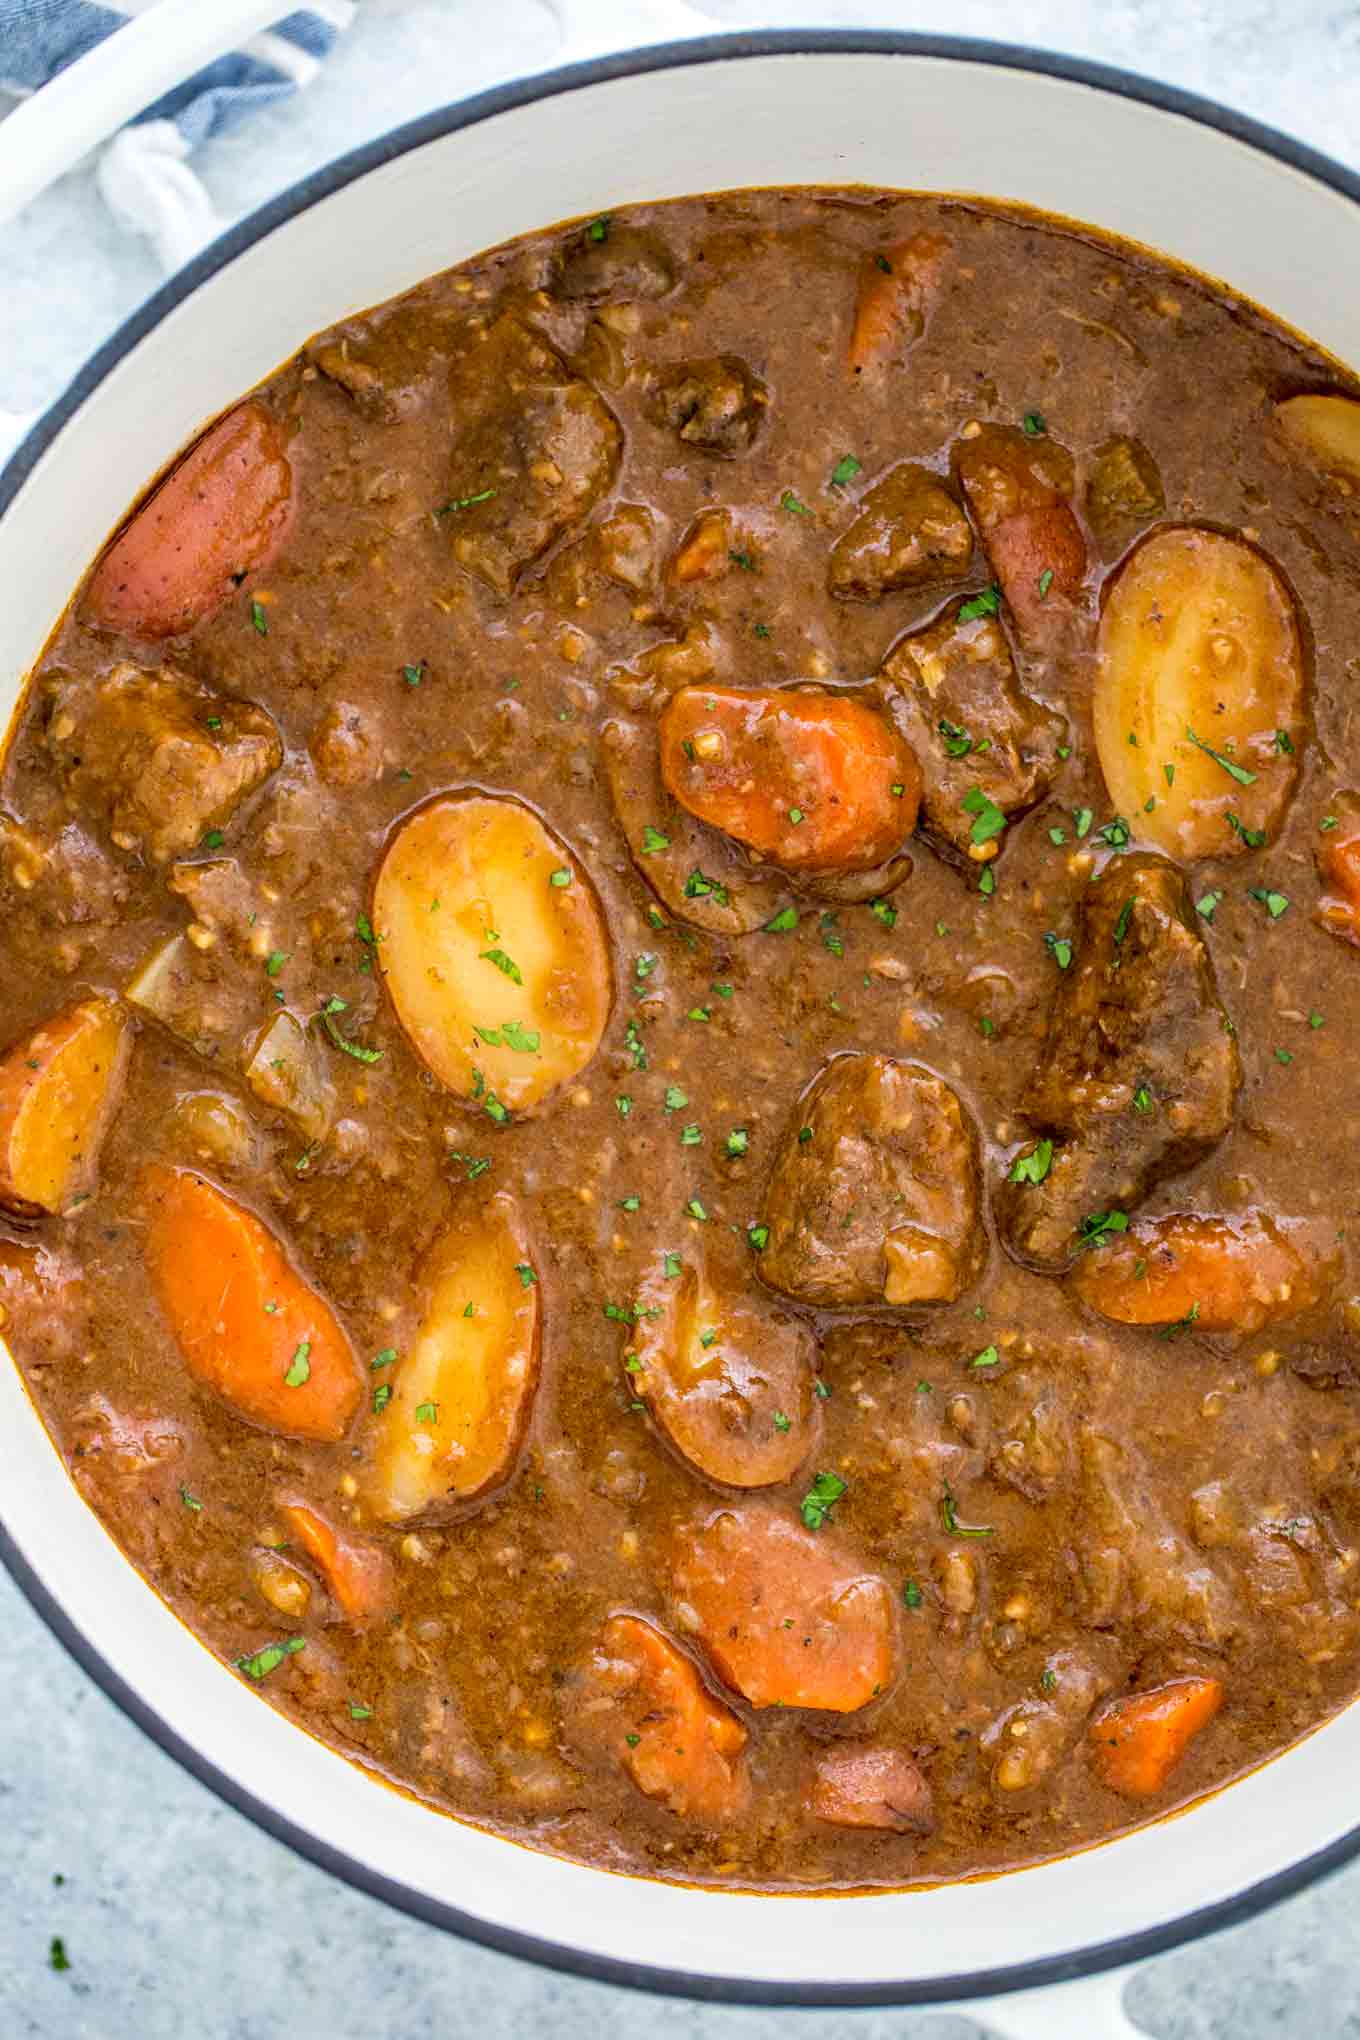 How to Make Beef Stew [Video] - Sweet and Savory Meals